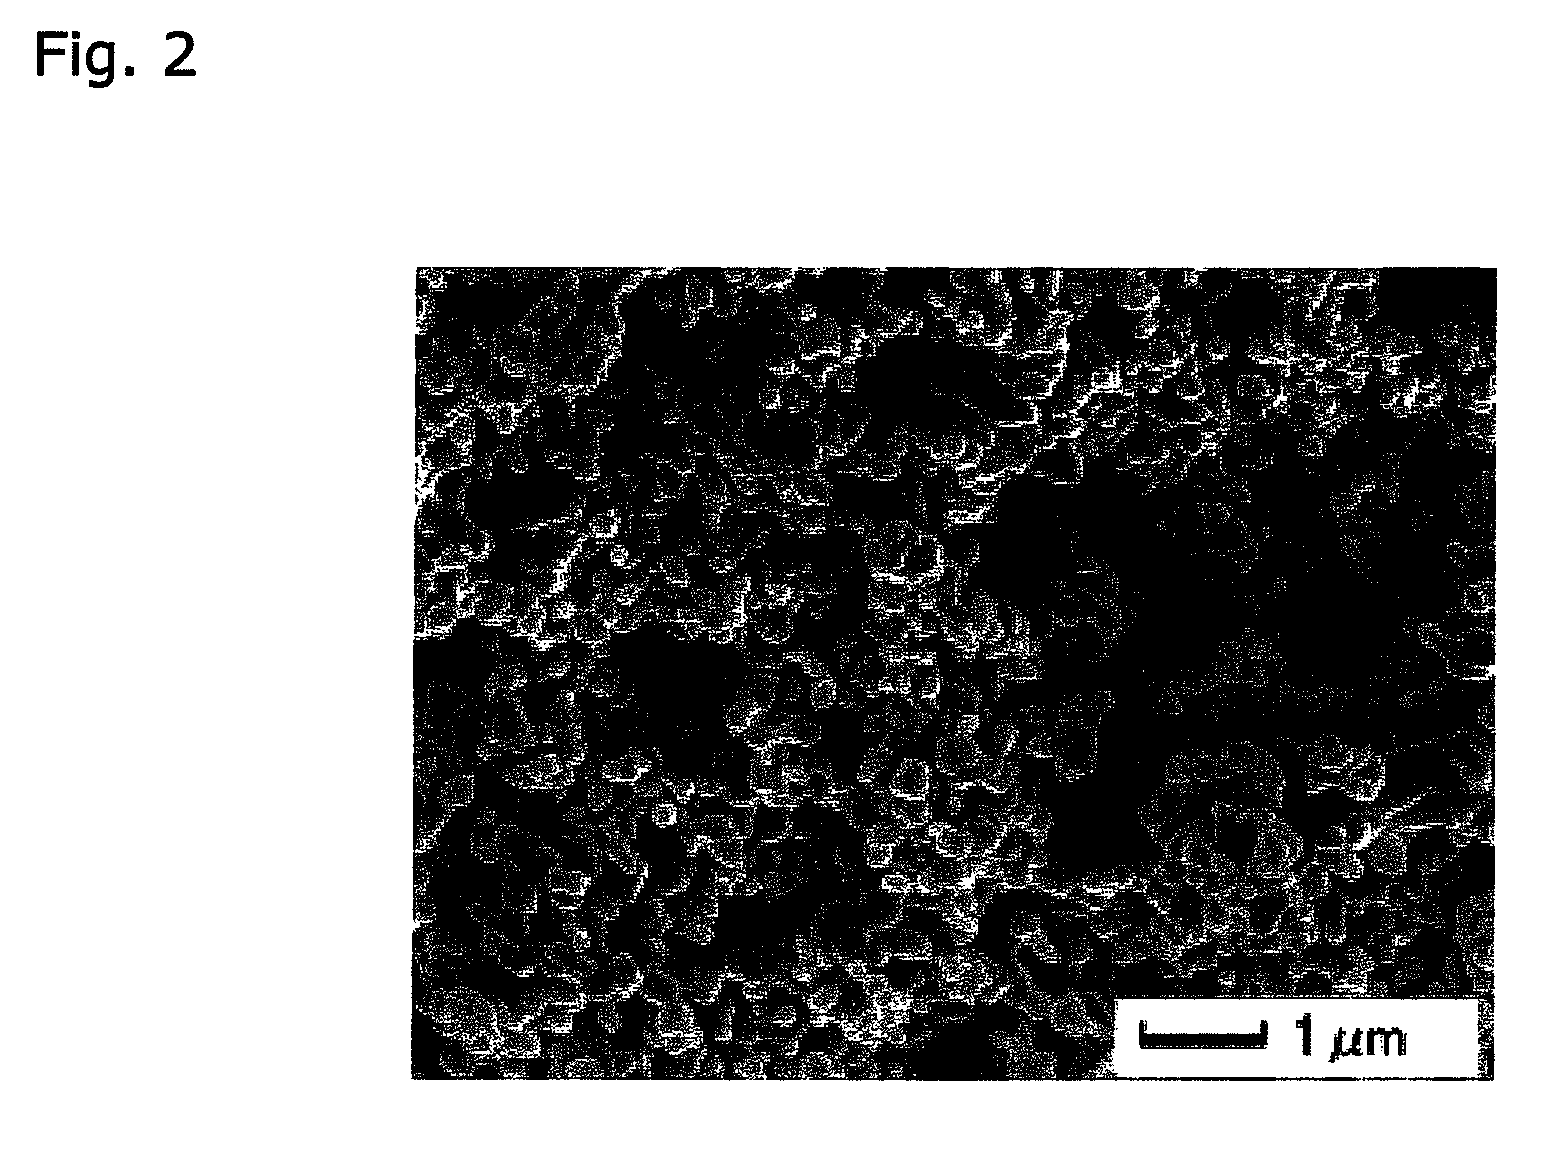 Mixed material of lithium iron phosphate and carbon, electrode containing same, battery comprising such electrode, method for producing such mixed material, and method for producing battery